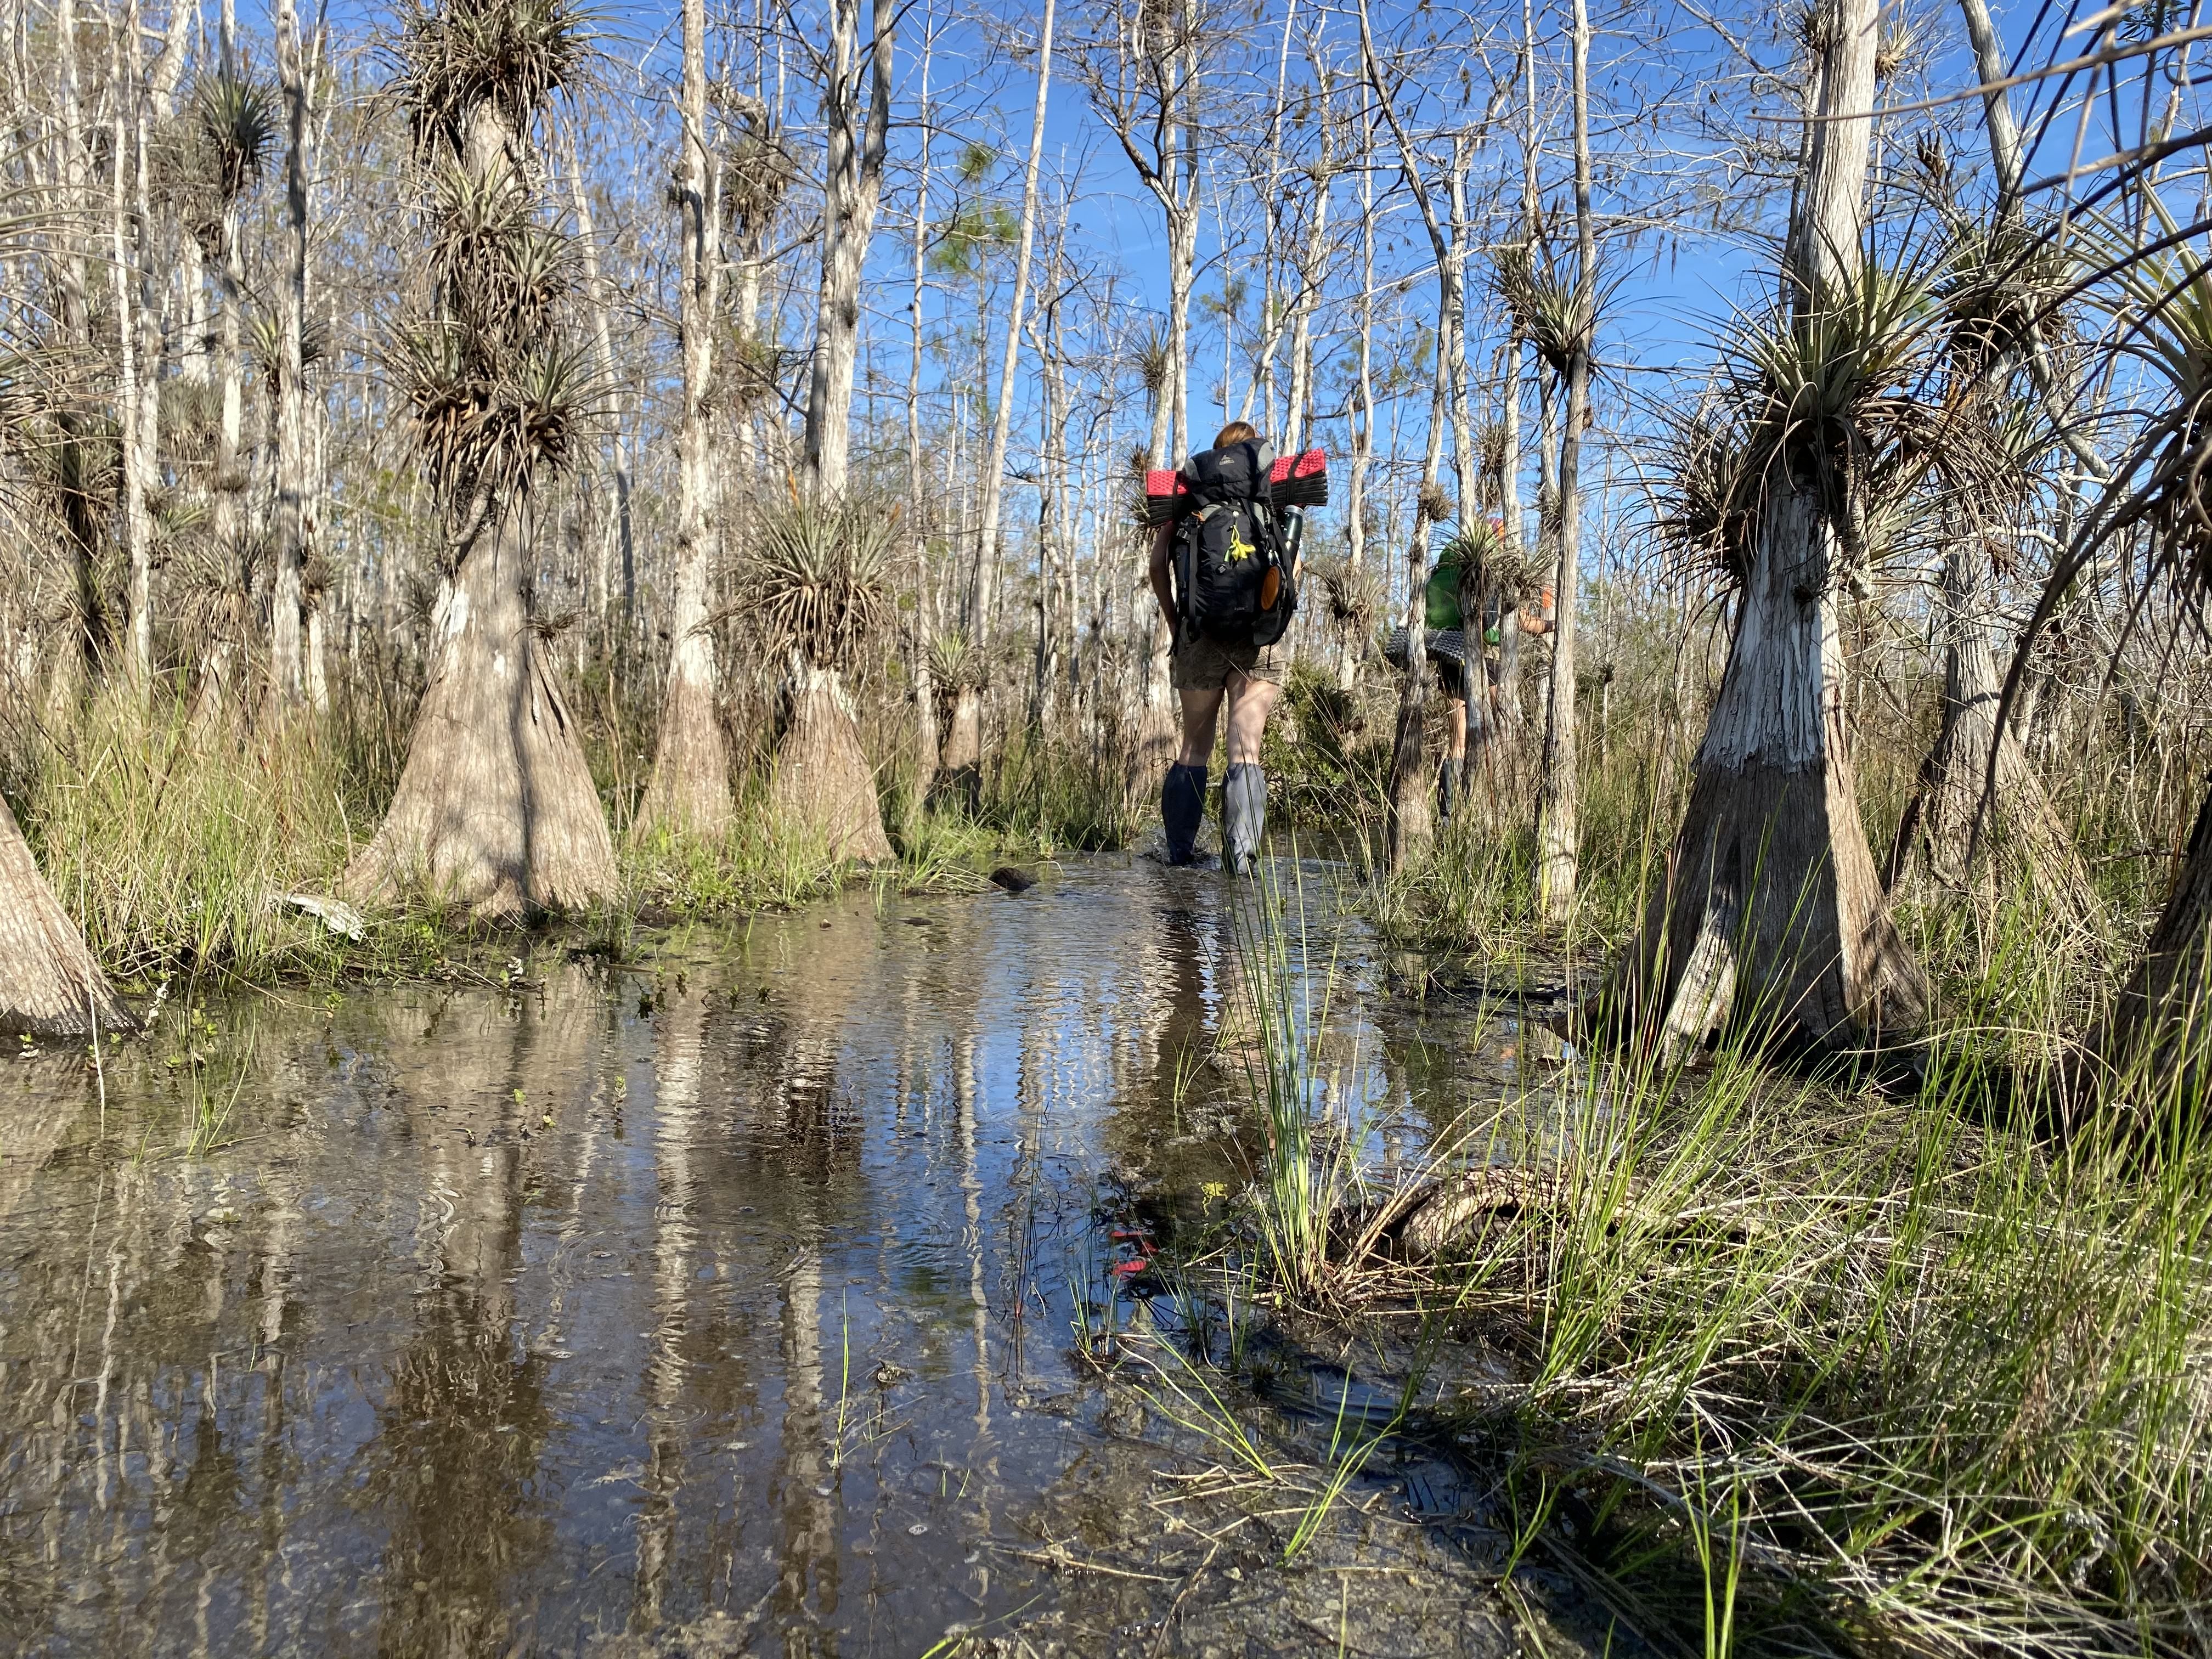 Hikers in the Big Cypress Swamp